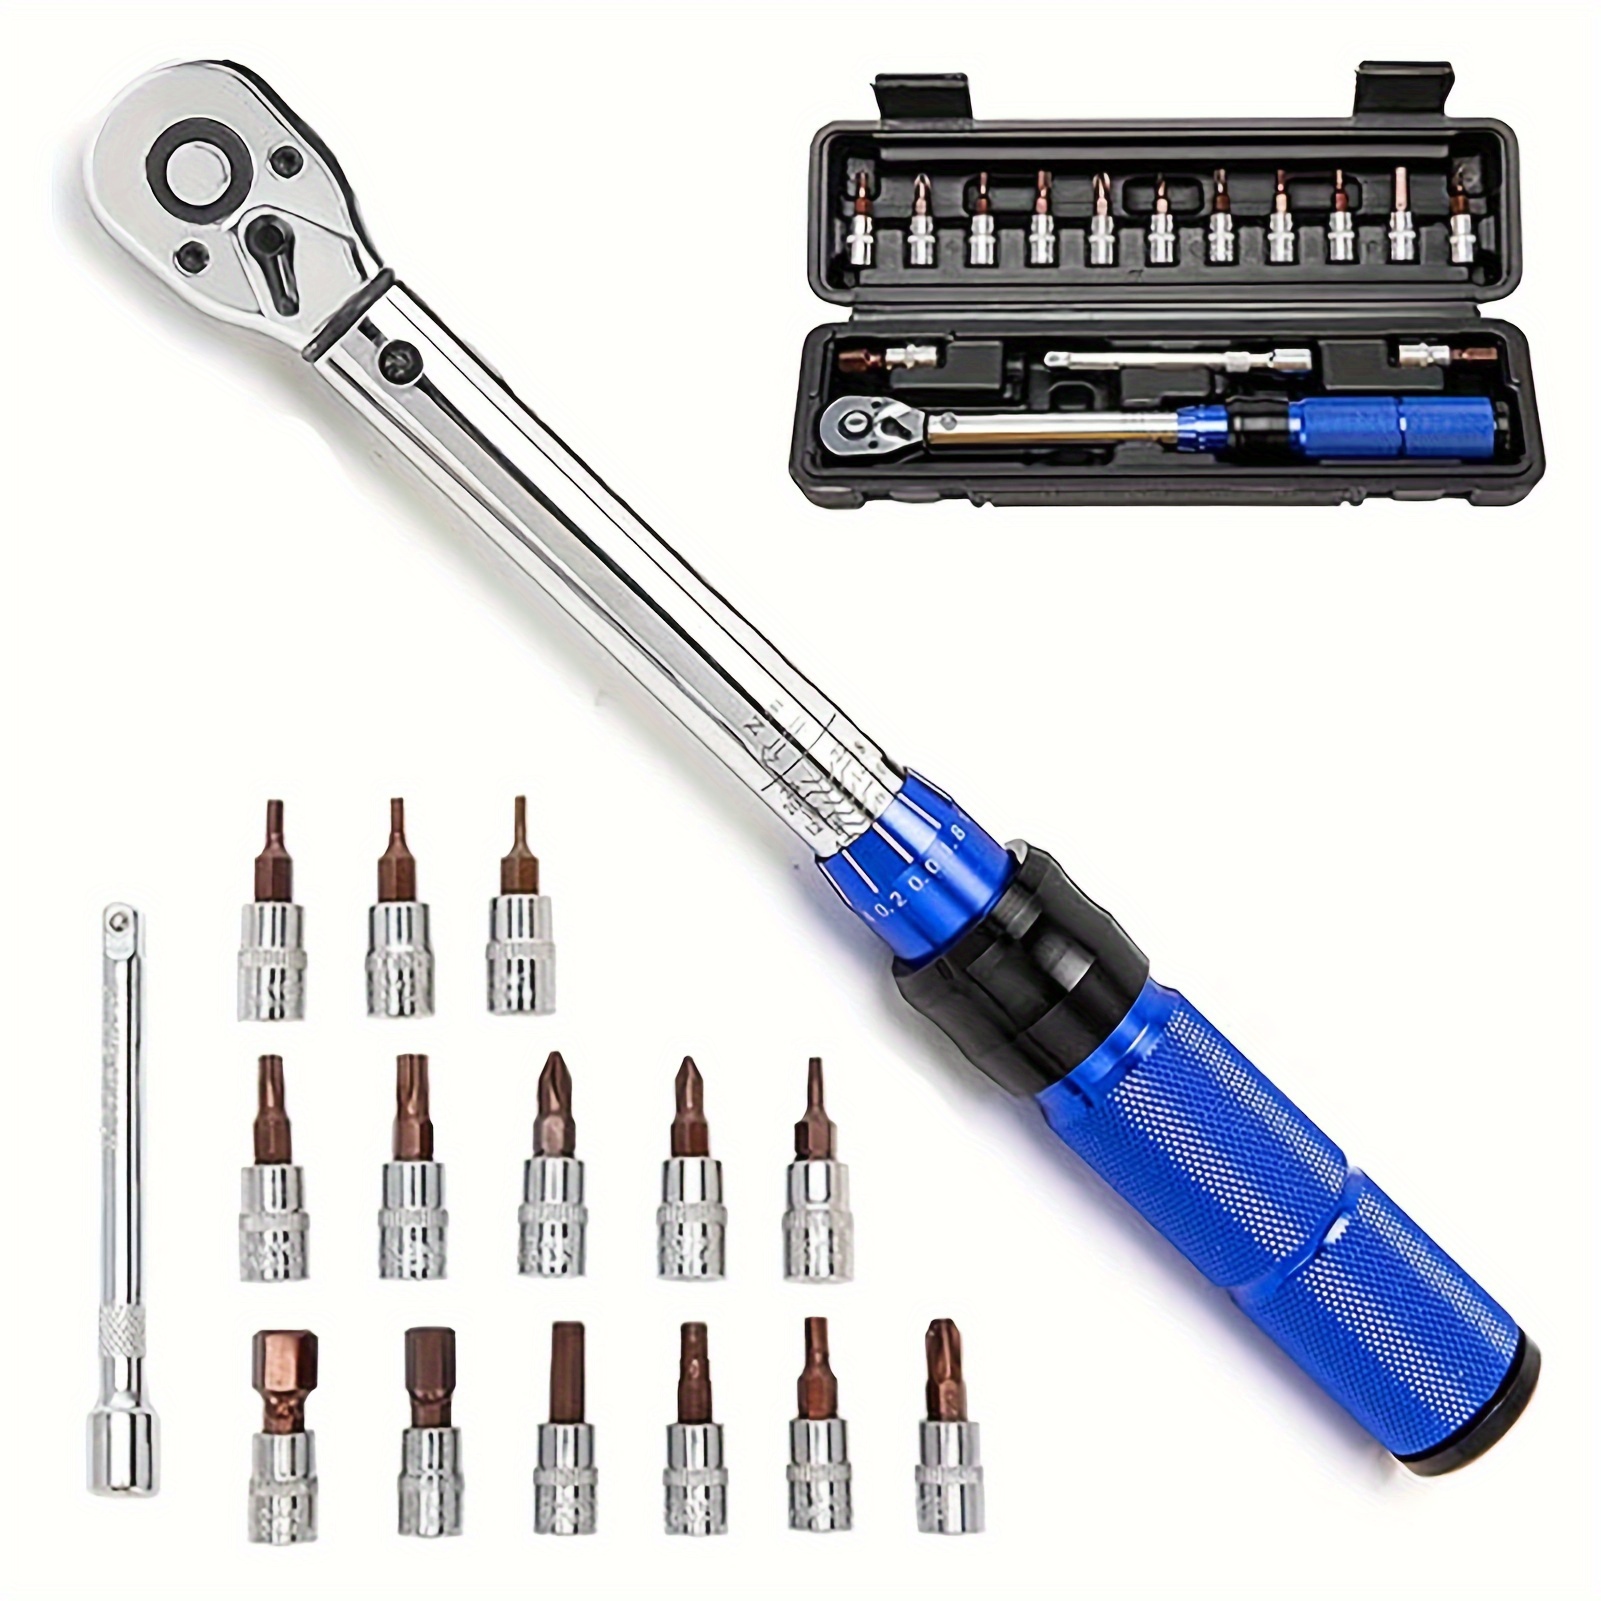 

Adjustable Torque Wrench Sturdy Drive Click Torque Screwdriver Wrench Set Mountain Road Bikes Bicycle Tool Kit